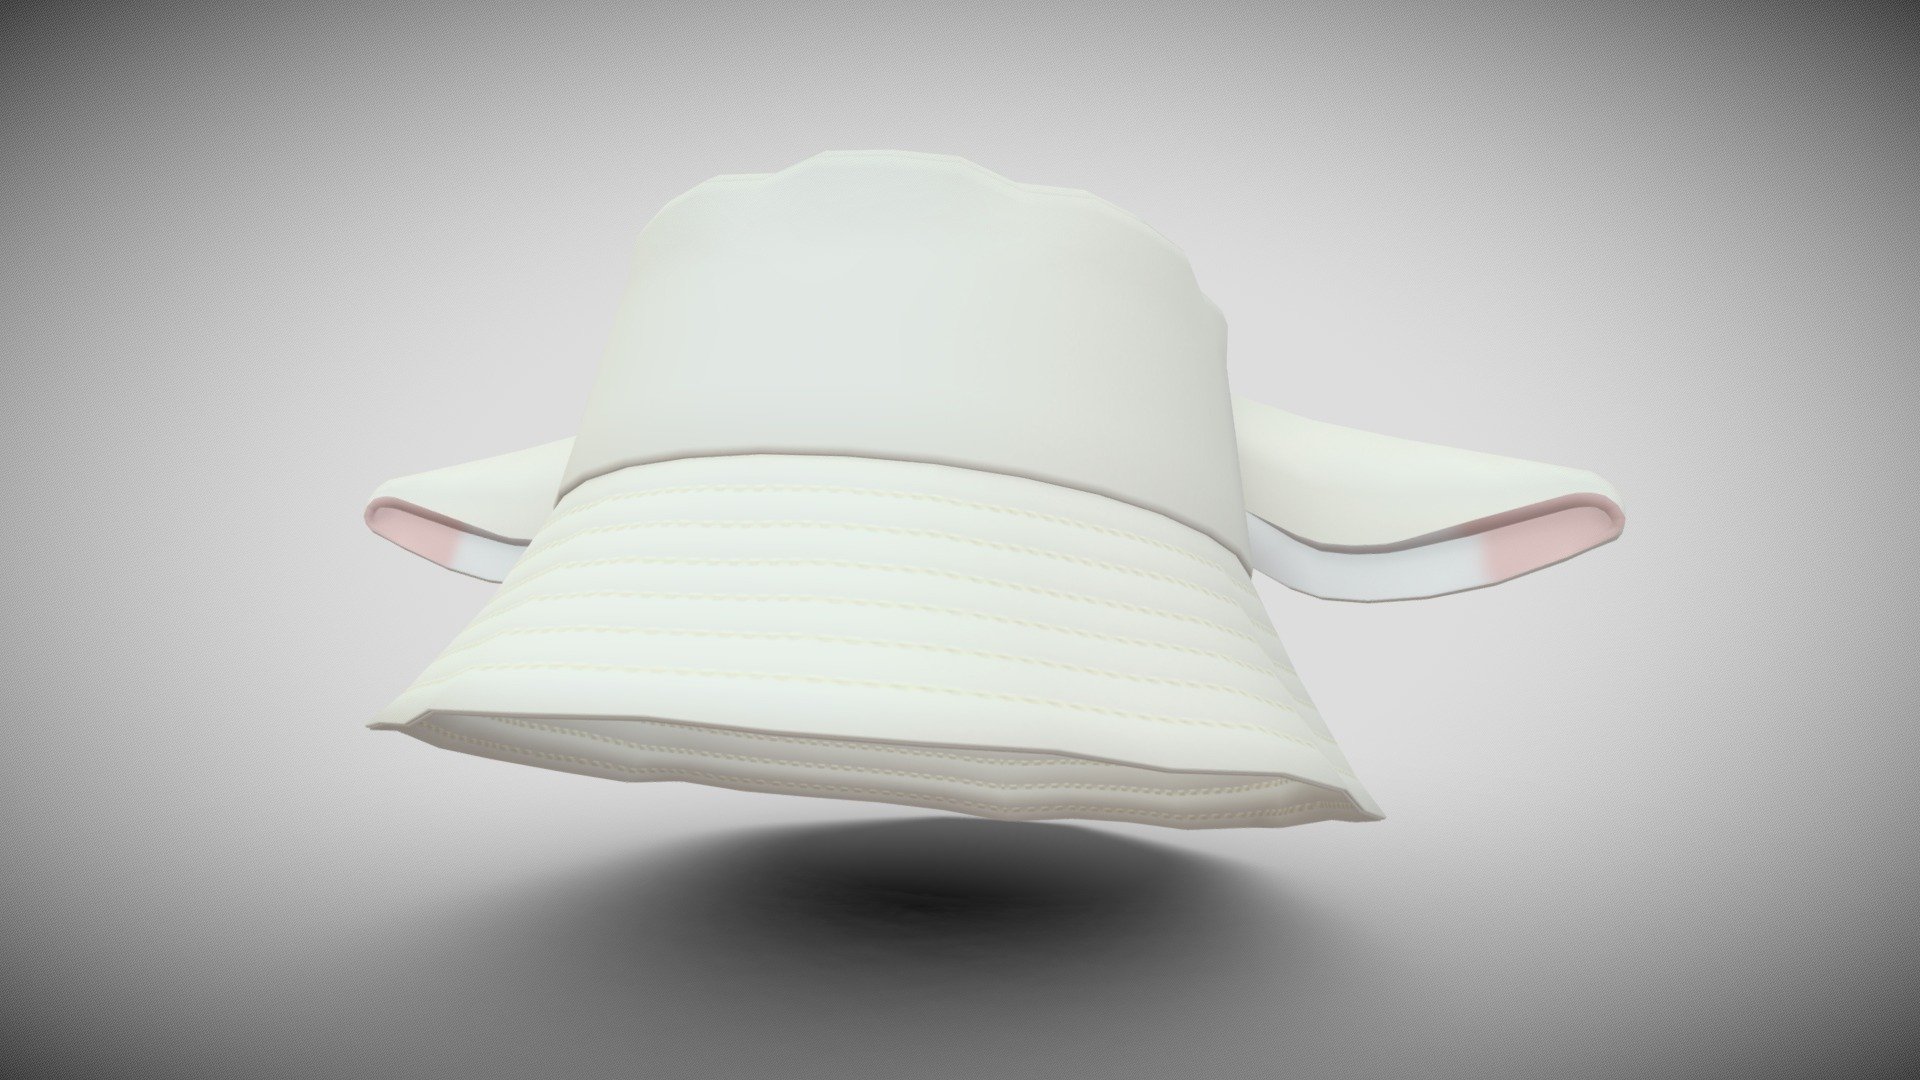 Introducing our new Lamb Ear Design Bucket Hats in two charming colors! The bright white is perfect for your summer style, while the sleek black adds a touch of uniqueness to your fashion statement. Embrace the sheep-inspired fashion trend with these stylish head accessories.

It is adjusted with the VRM humanoid model output from VRoidStudio.







For Sketchfab’s convenience, the time when direct sales will be available is yet to be determined.

If you want to go to an external sales site, you can do so via the following tweet

https://twitter.com/ayuyatest/status/1676765180284522497?s=20






You can check out and purchase the two colors at the link.

 - Lamb Ear Design Bucket Hat 💮📷 - 3D model by ayumi ikeda (@rxf10240) 3d model